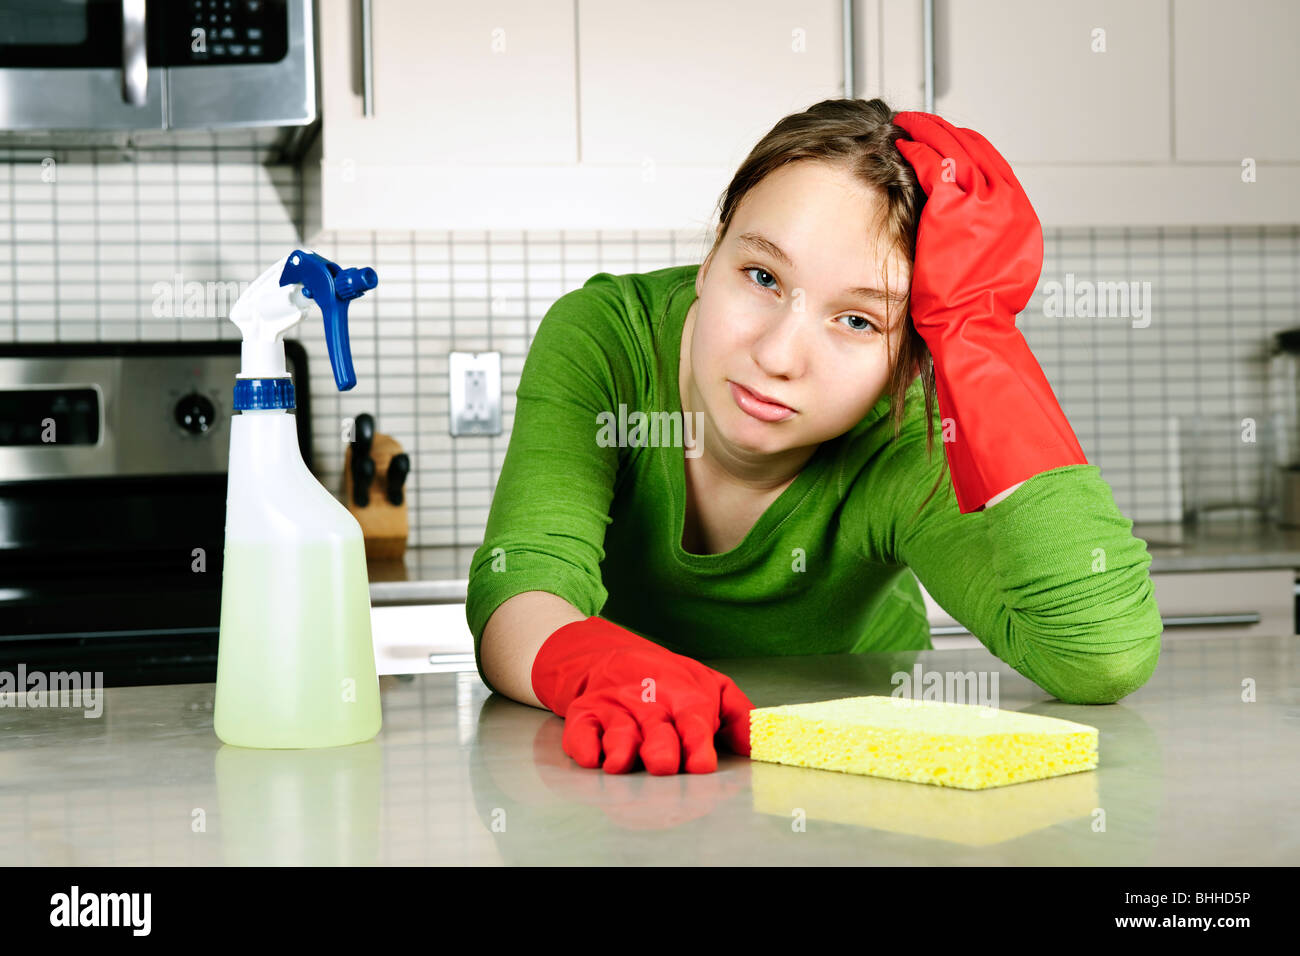 Tired girl doing kitchen cleaning chores with rubber gloves Stock Photo